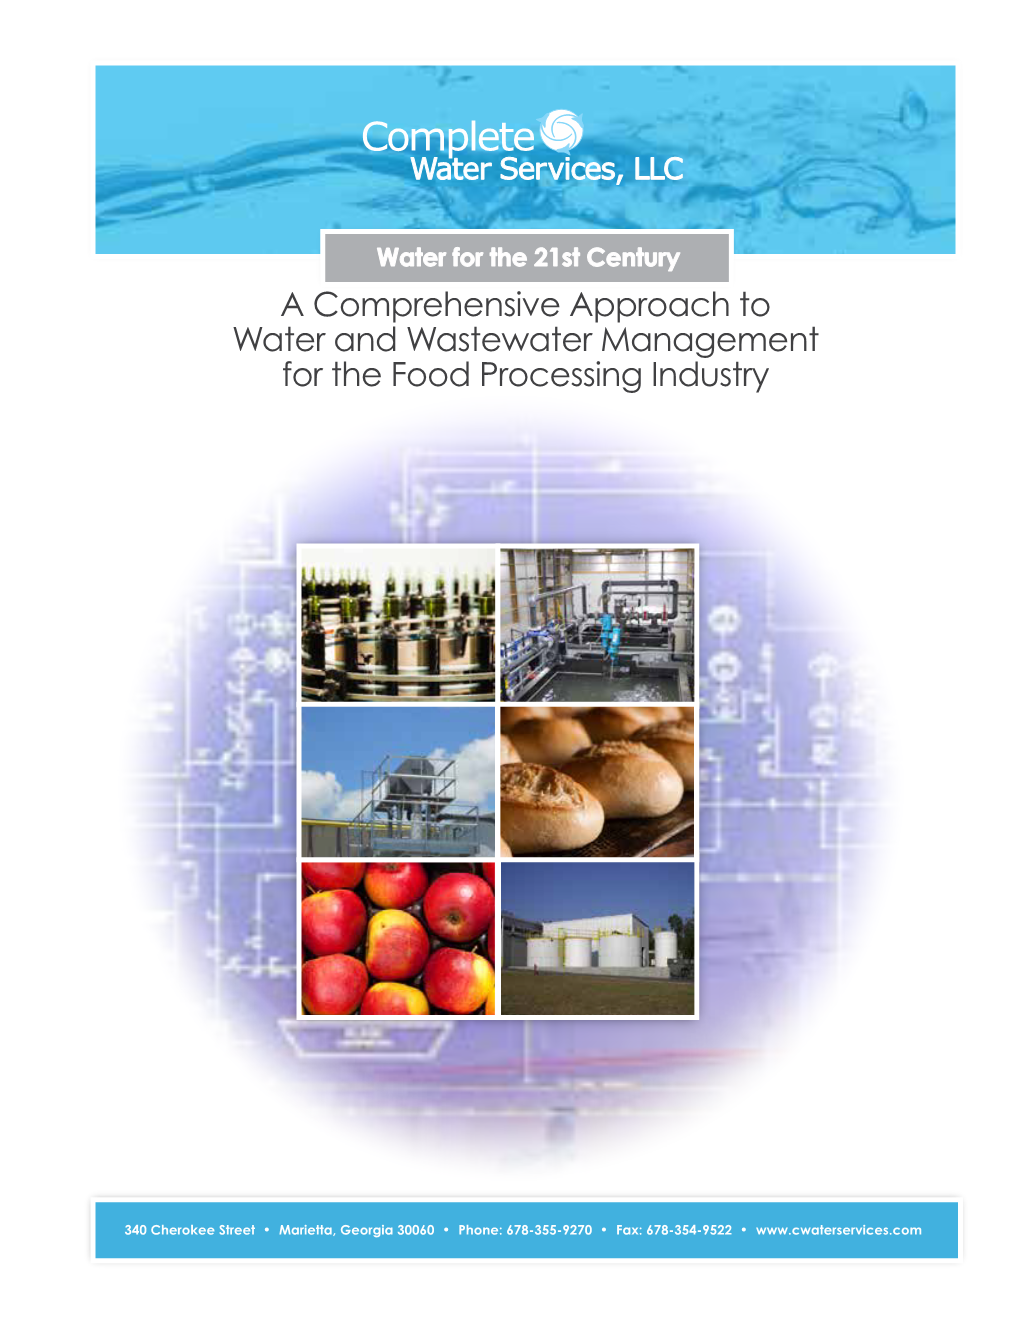 A Comprehensive Approach to Water and Wastewater Management for the Food Processing Industry